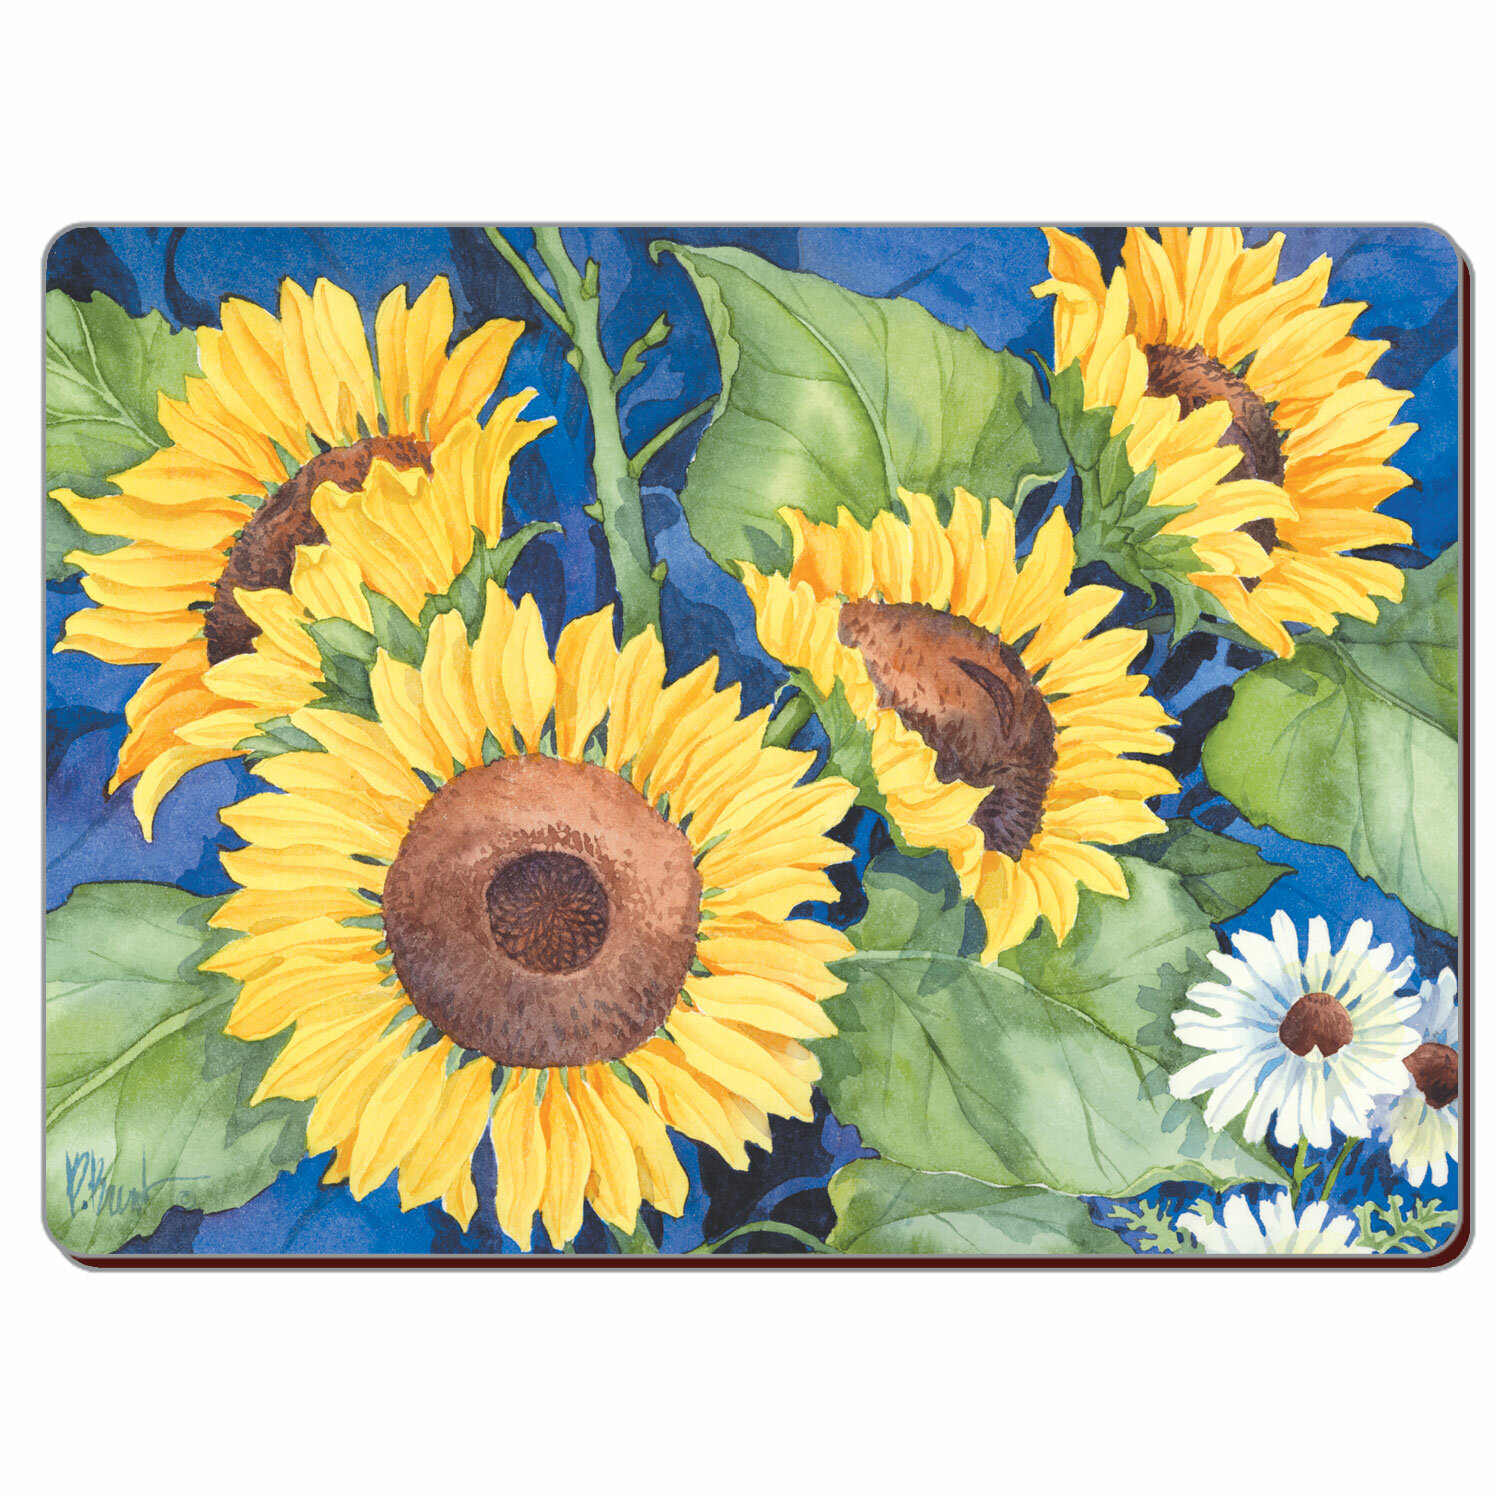 CounterArt Sunflower Fields Reversible Rectangular Placemat Set of 4 Made in The USA 